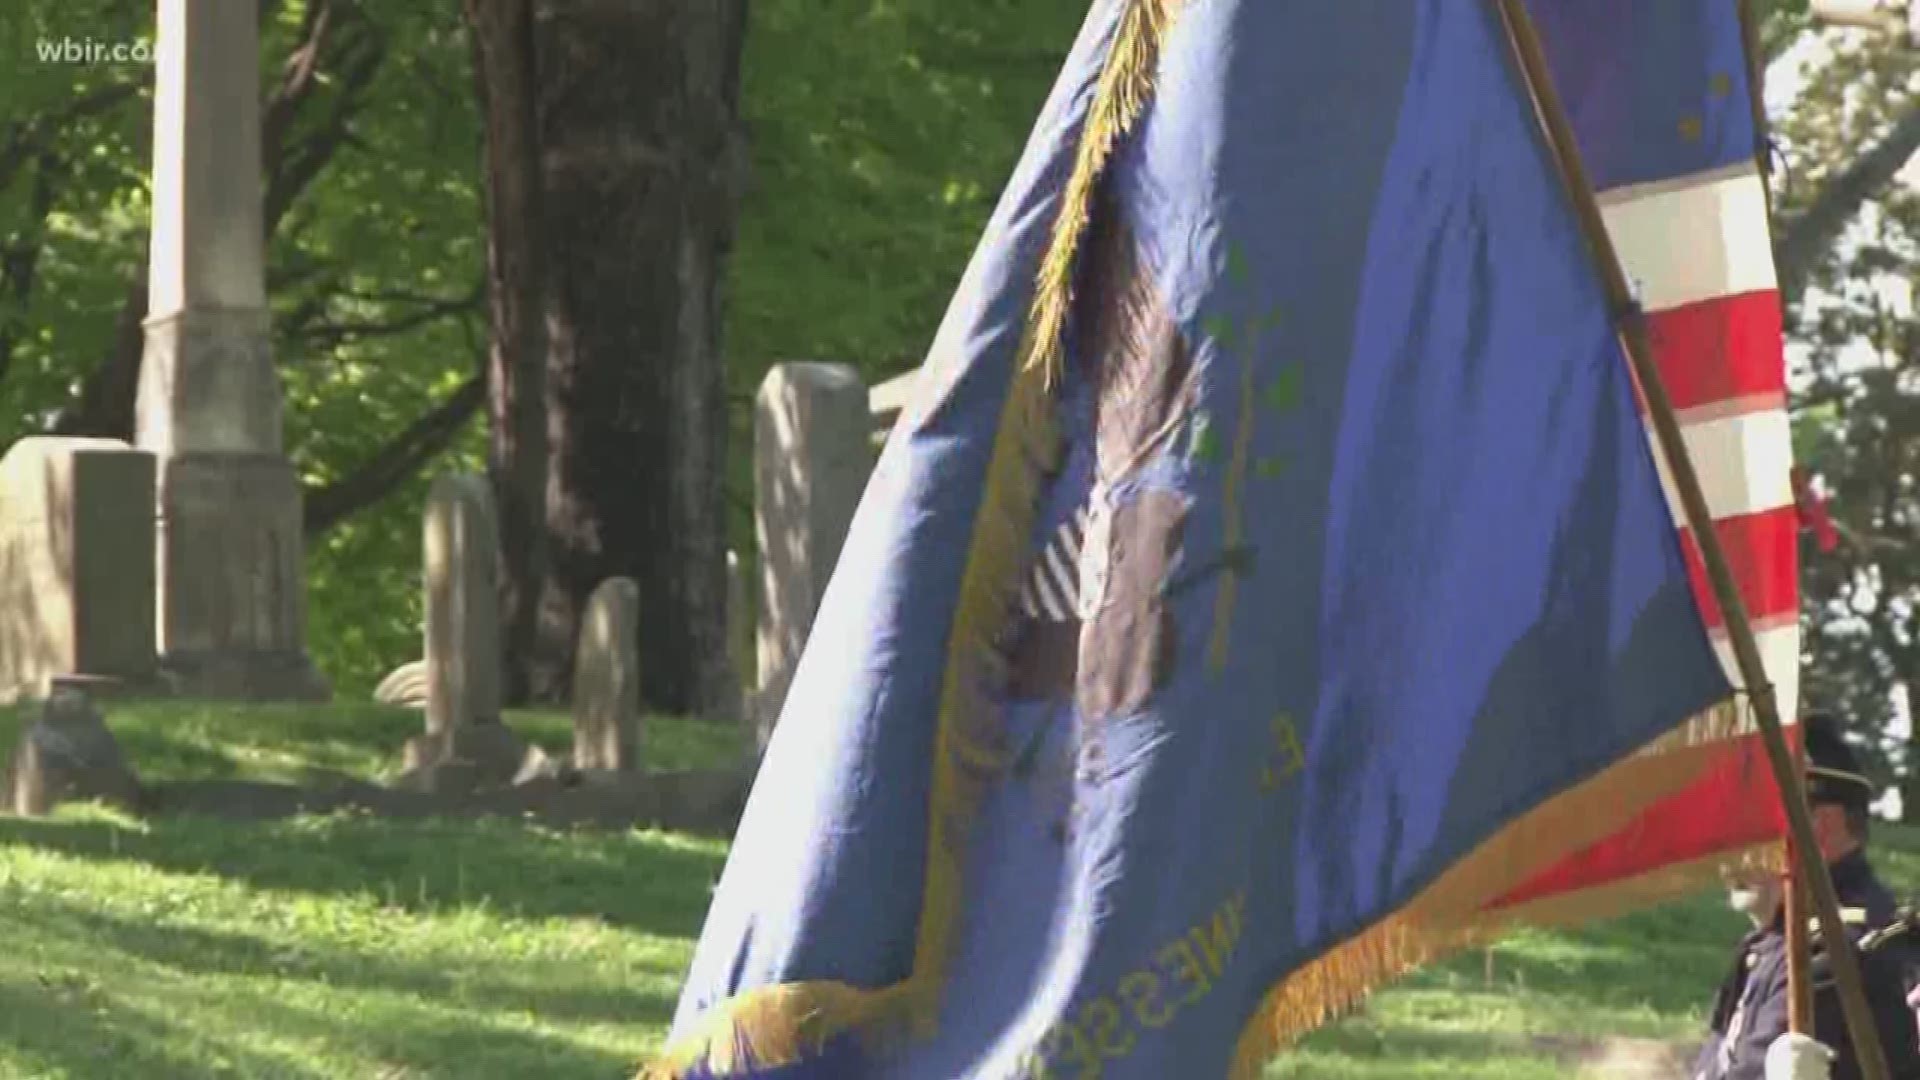 A Knoxville veteran was honored more than 100 years after he passed.